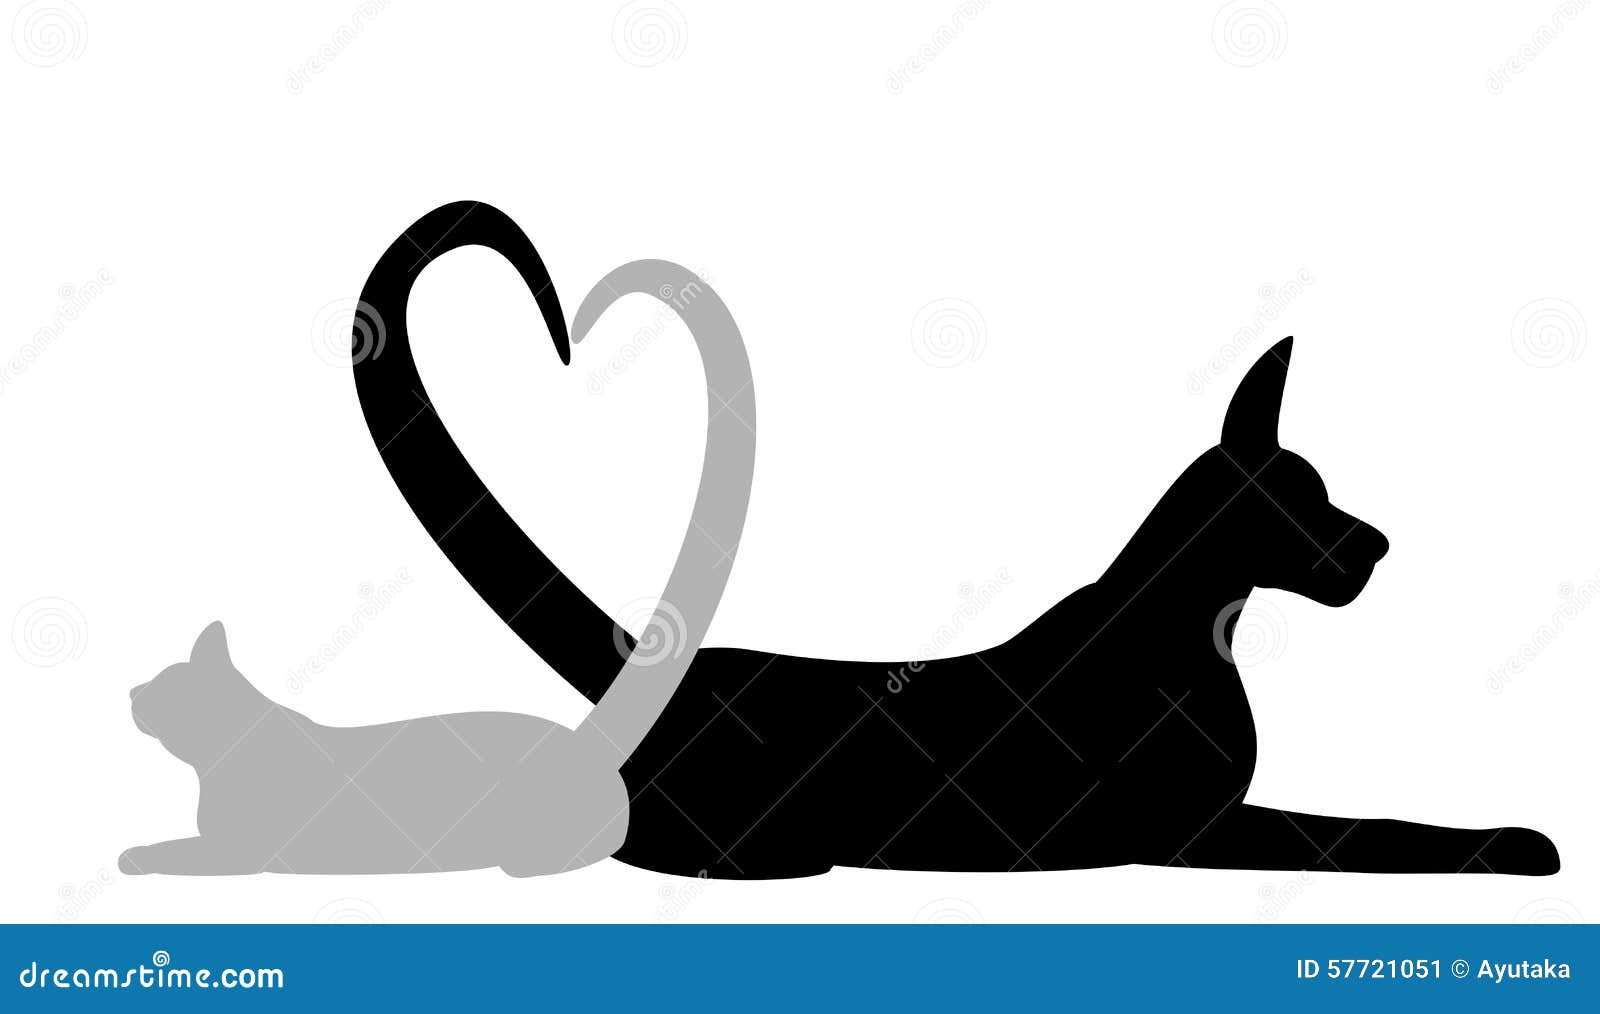 dog and cat making heart with tail